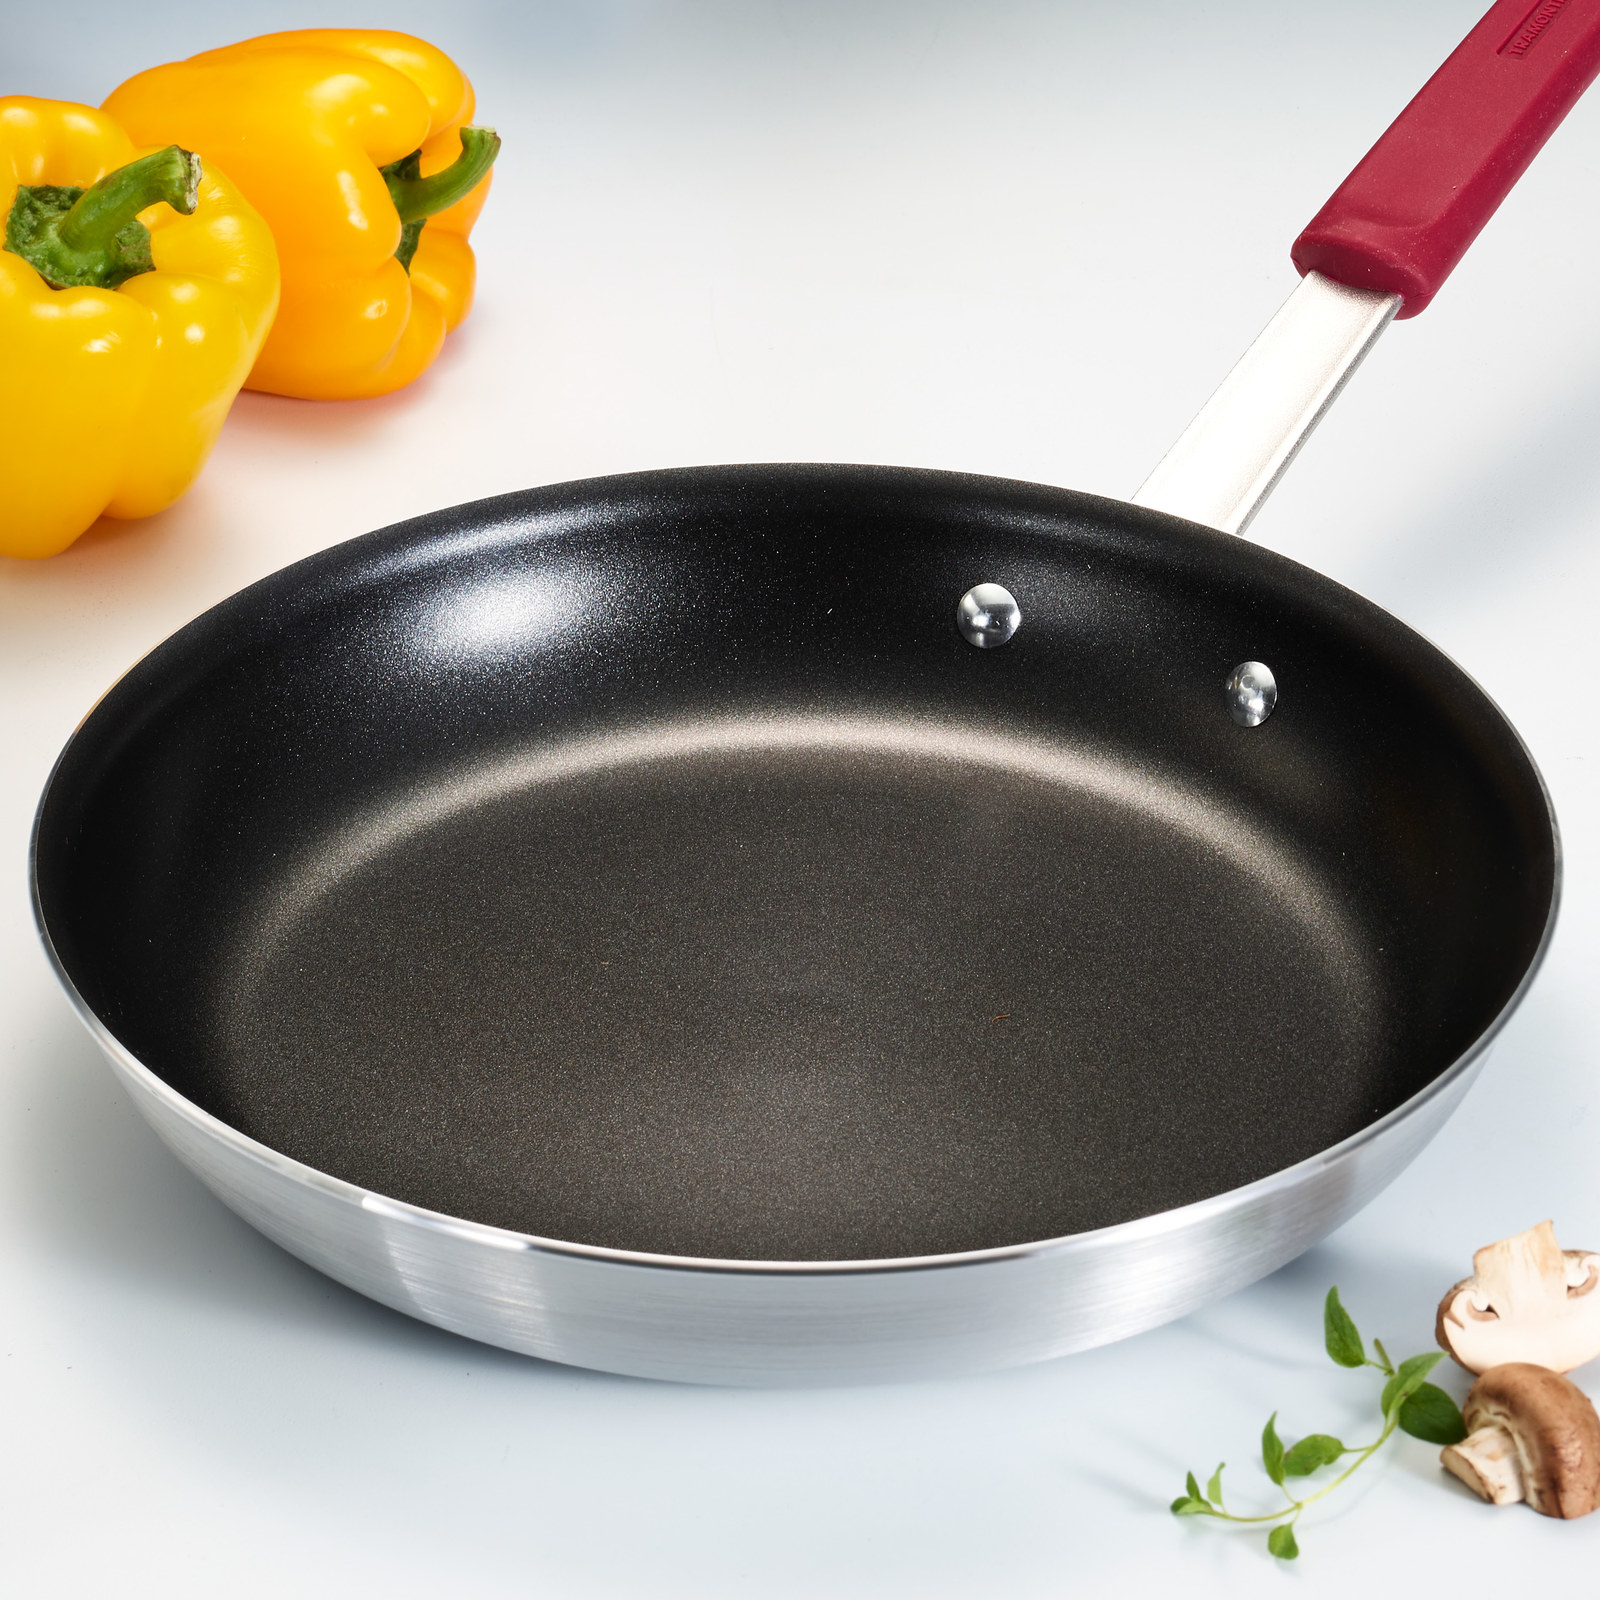 17 Of The Best NonStick Frying Pans You Can Get At Walmart